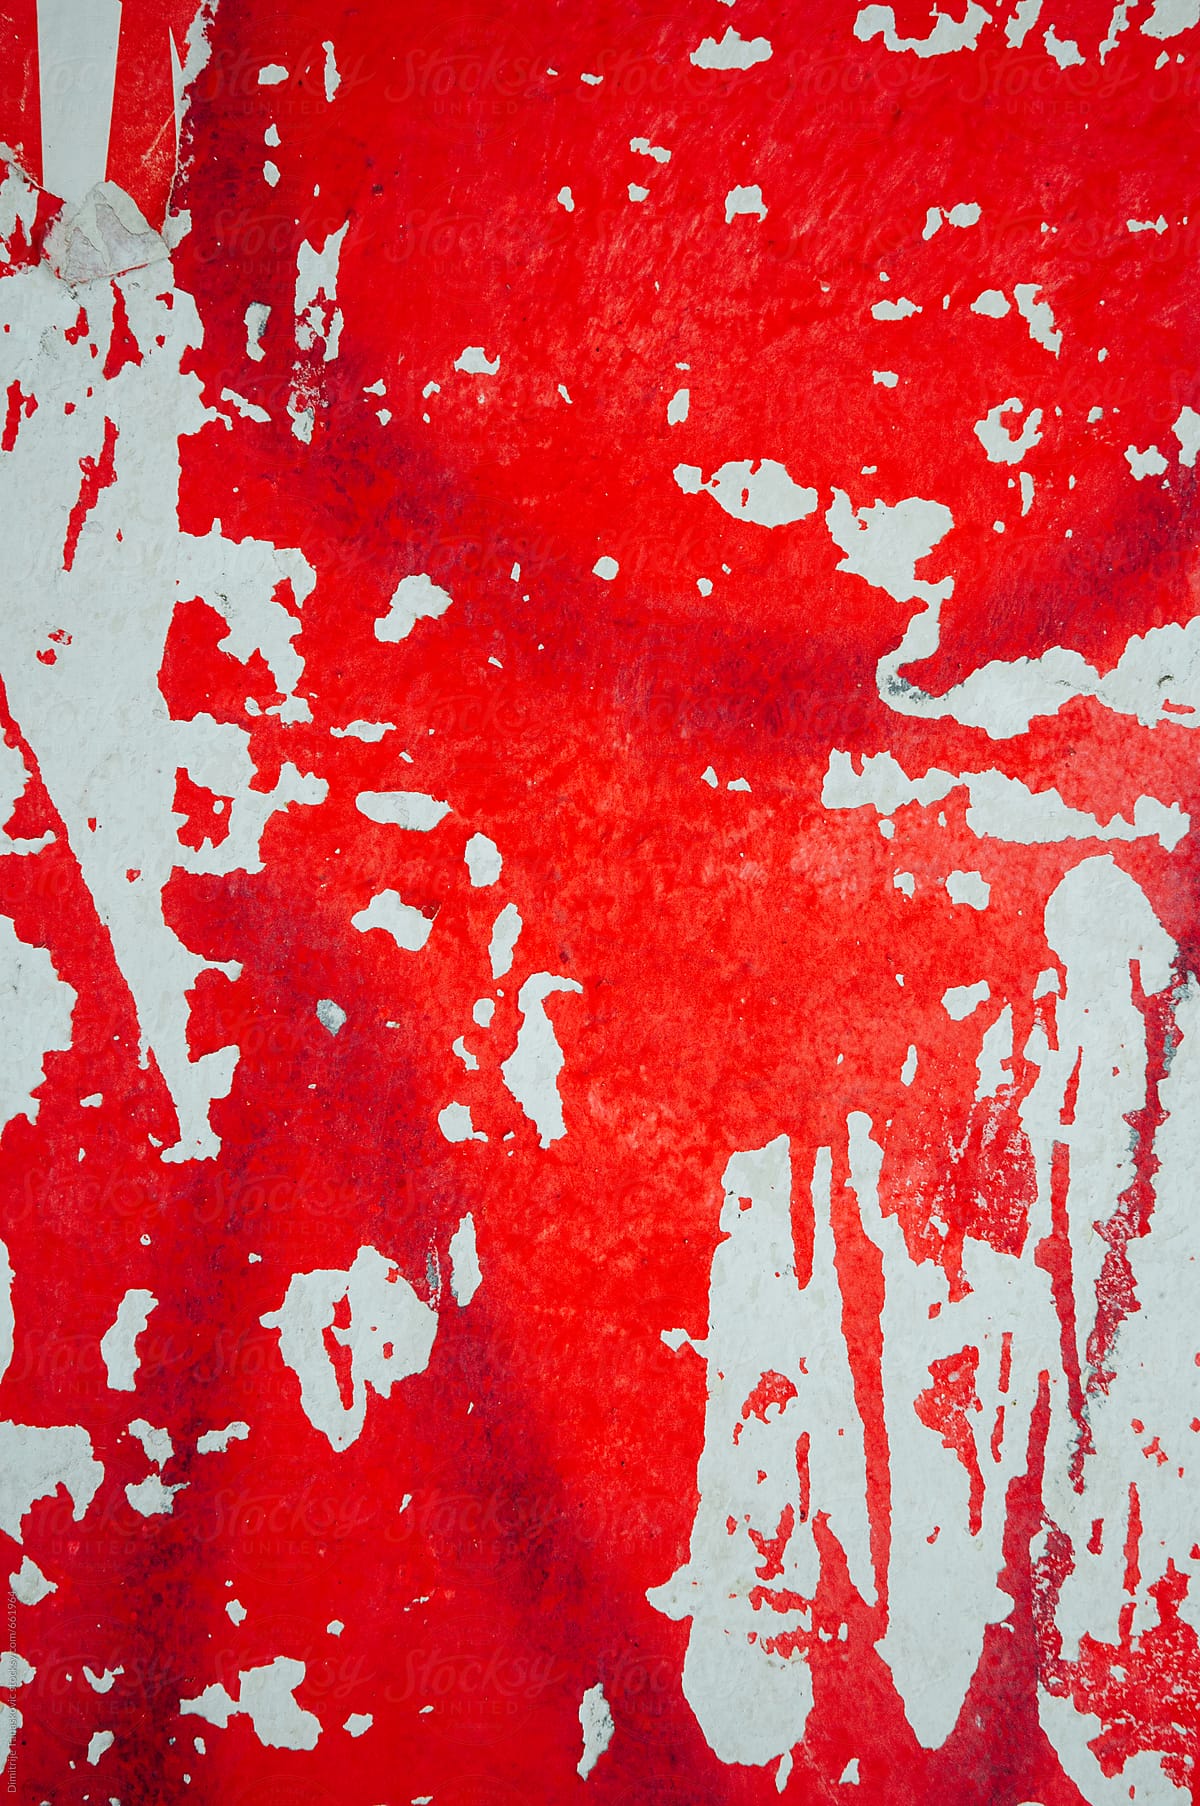 Abstract red painted background